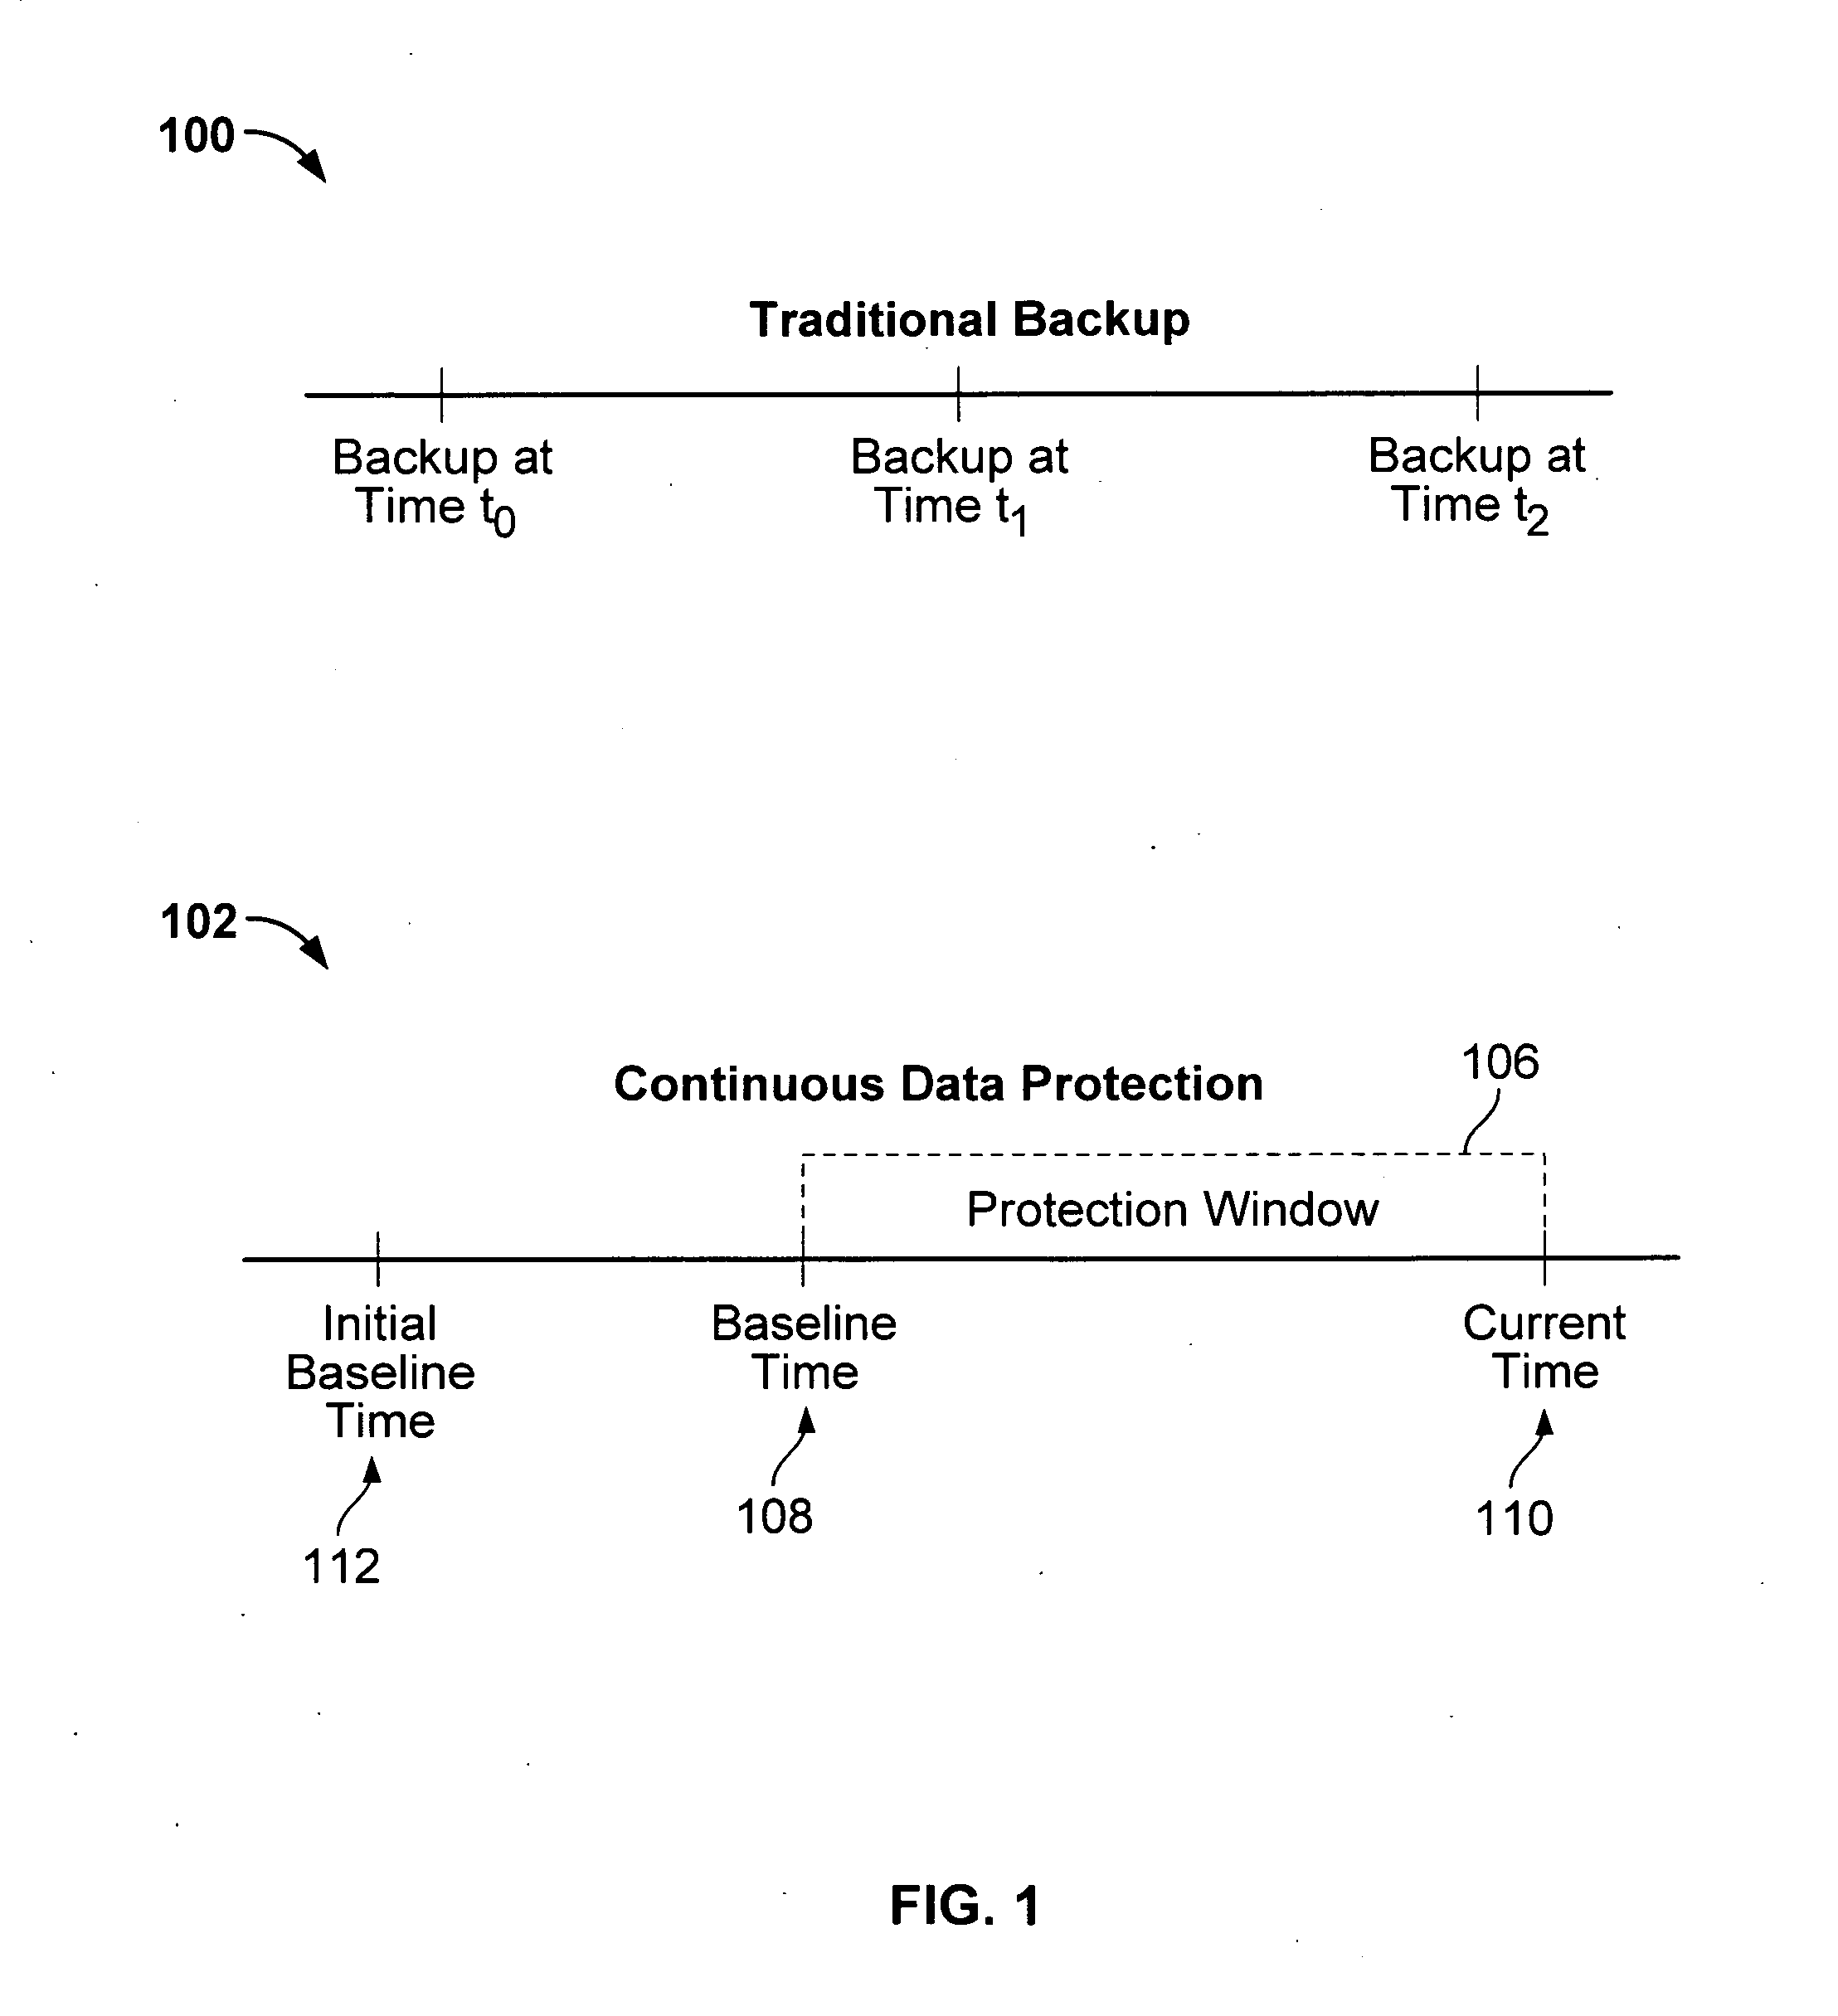 Linear space allocation mechanisms in data space